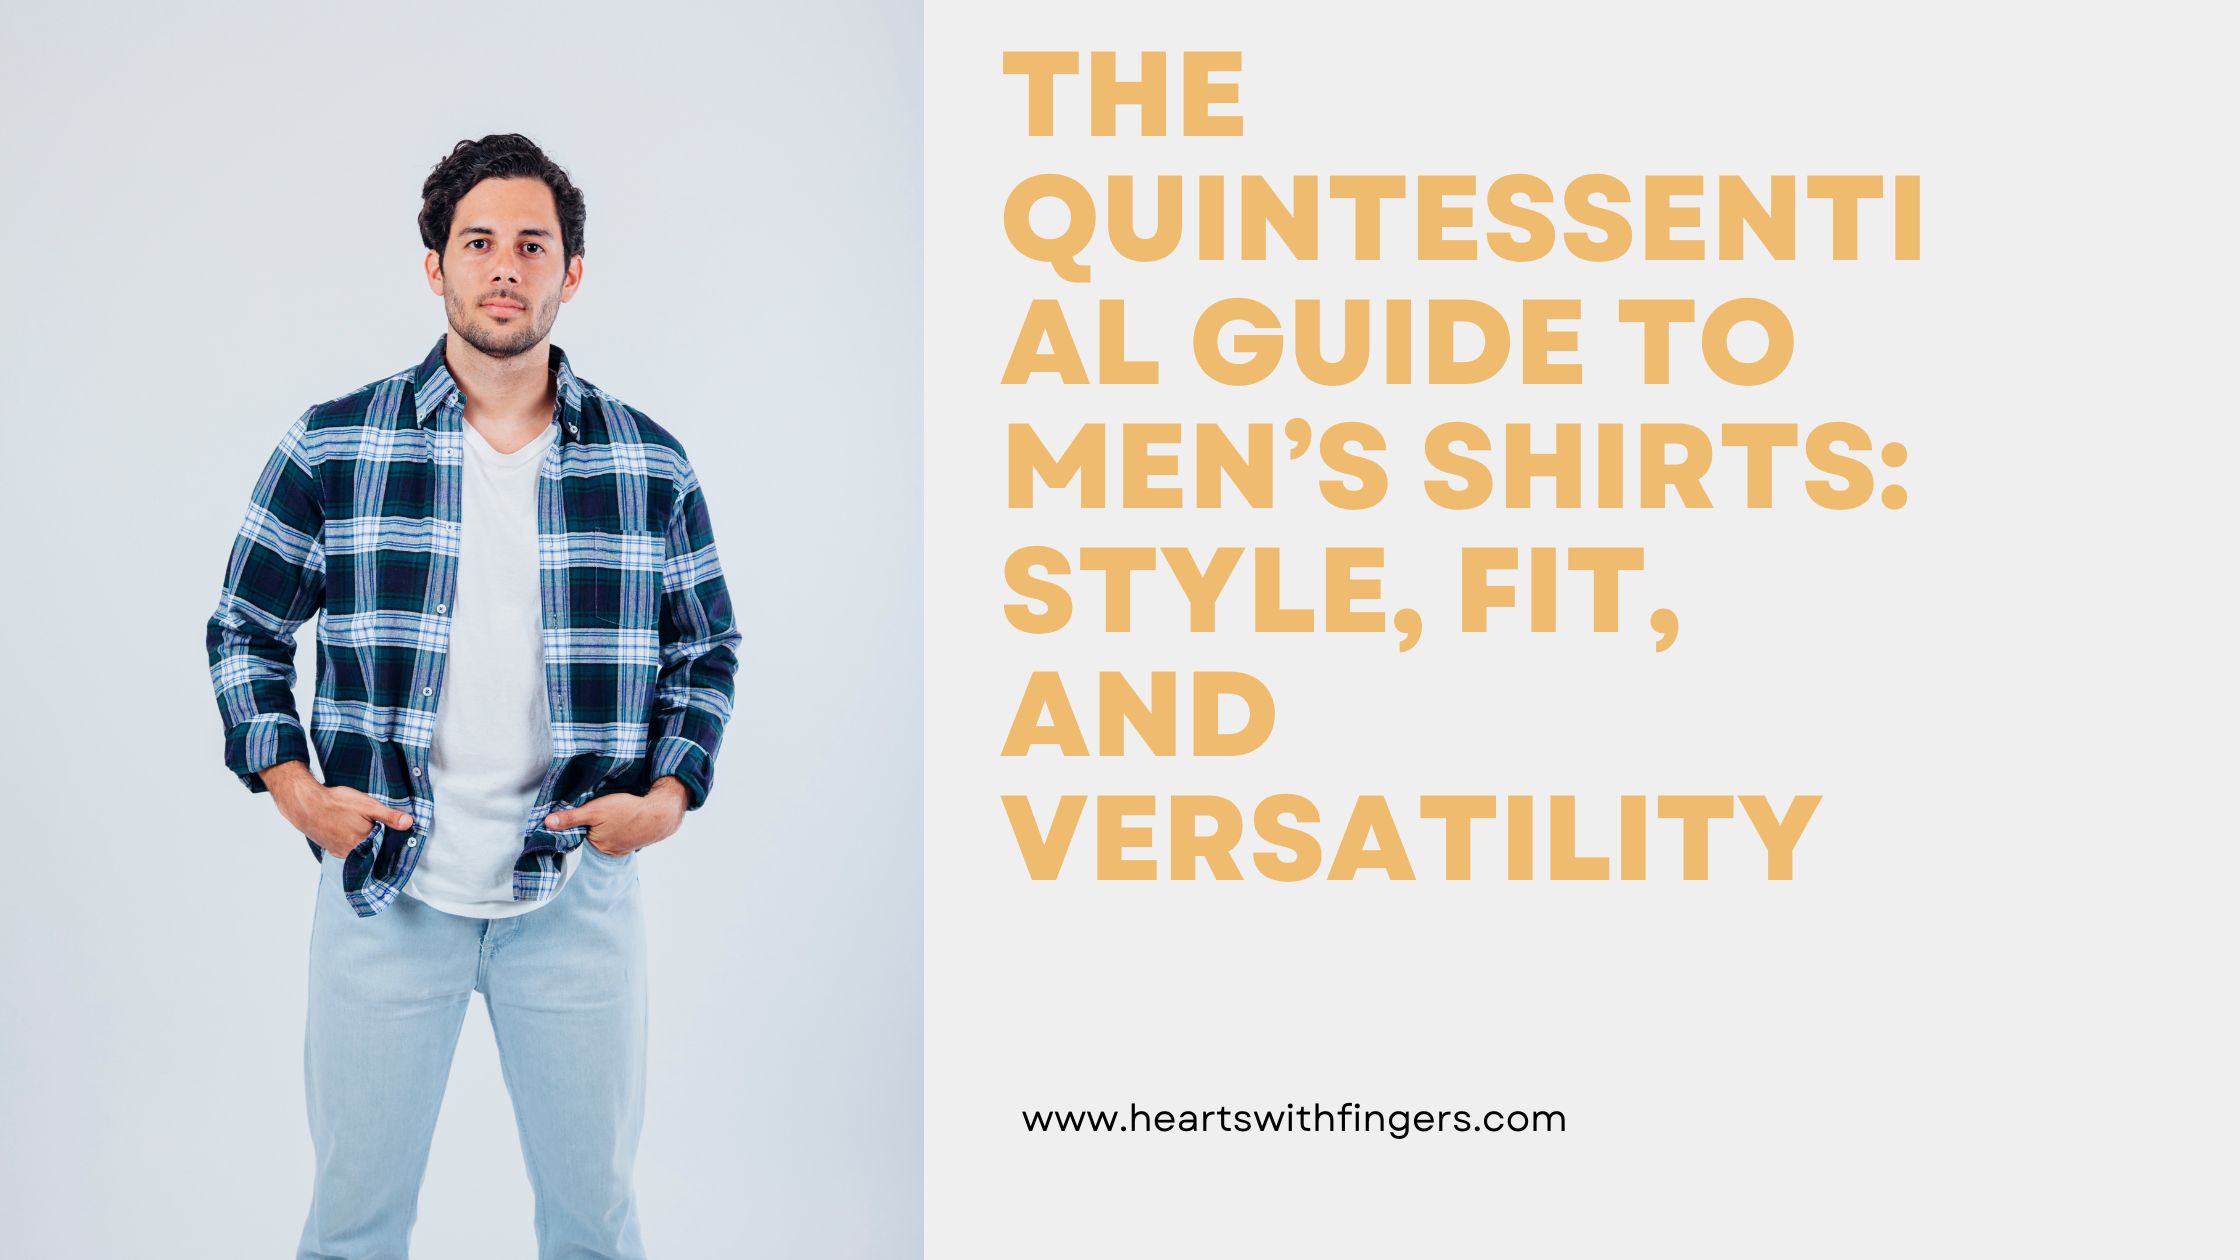 The Quintessential Guide to Men’s Shirts: Style, Fit, and Versatility